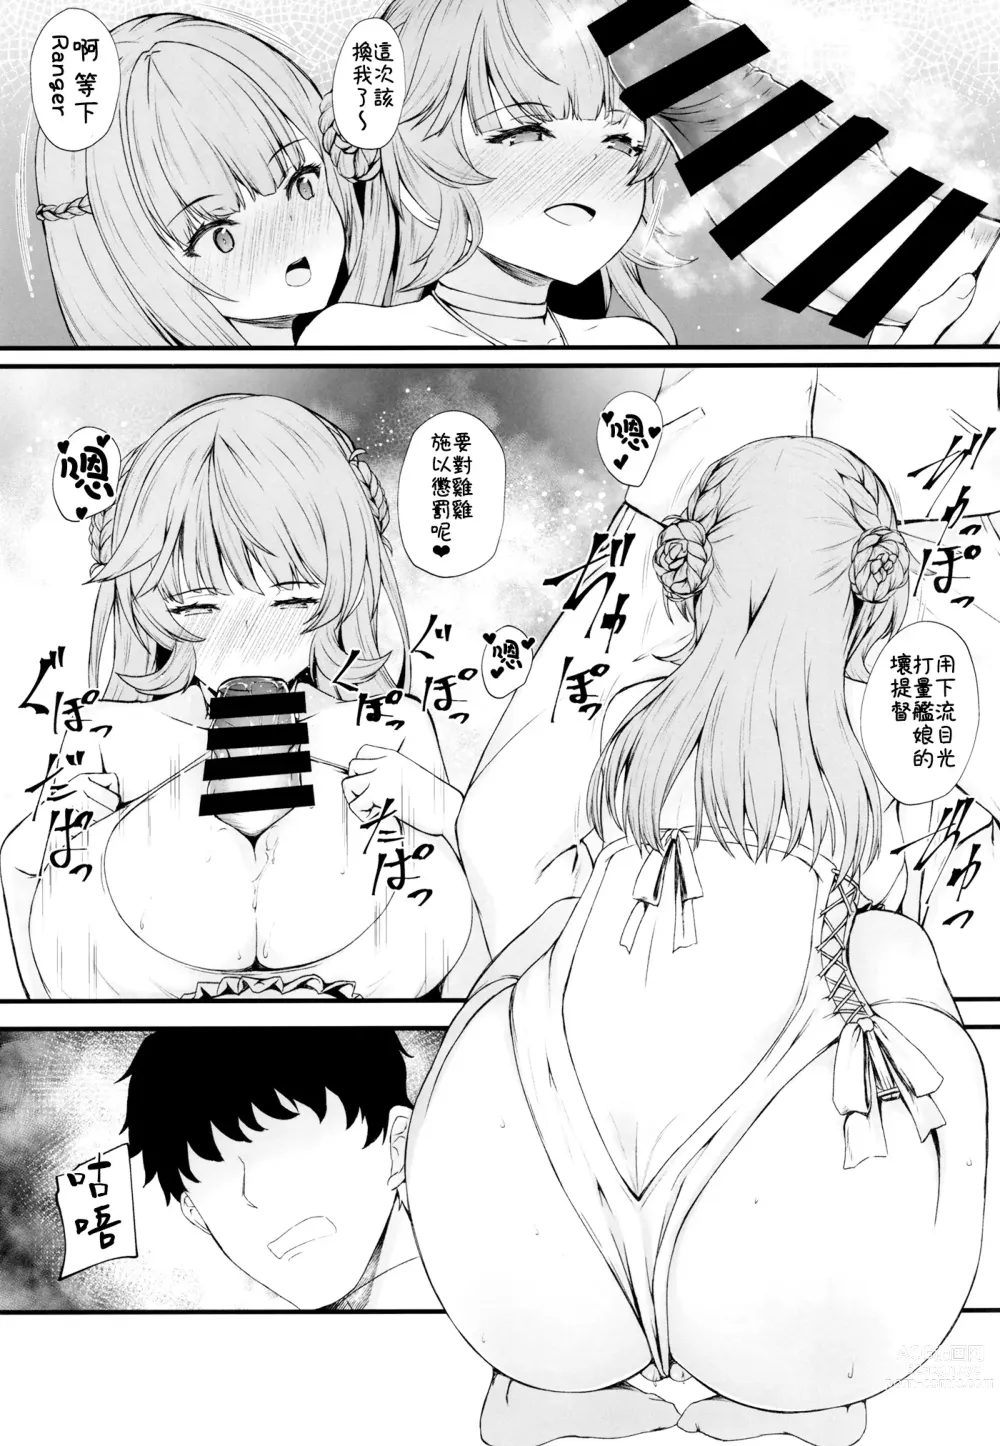 Page 7 of doujinshi RanMary